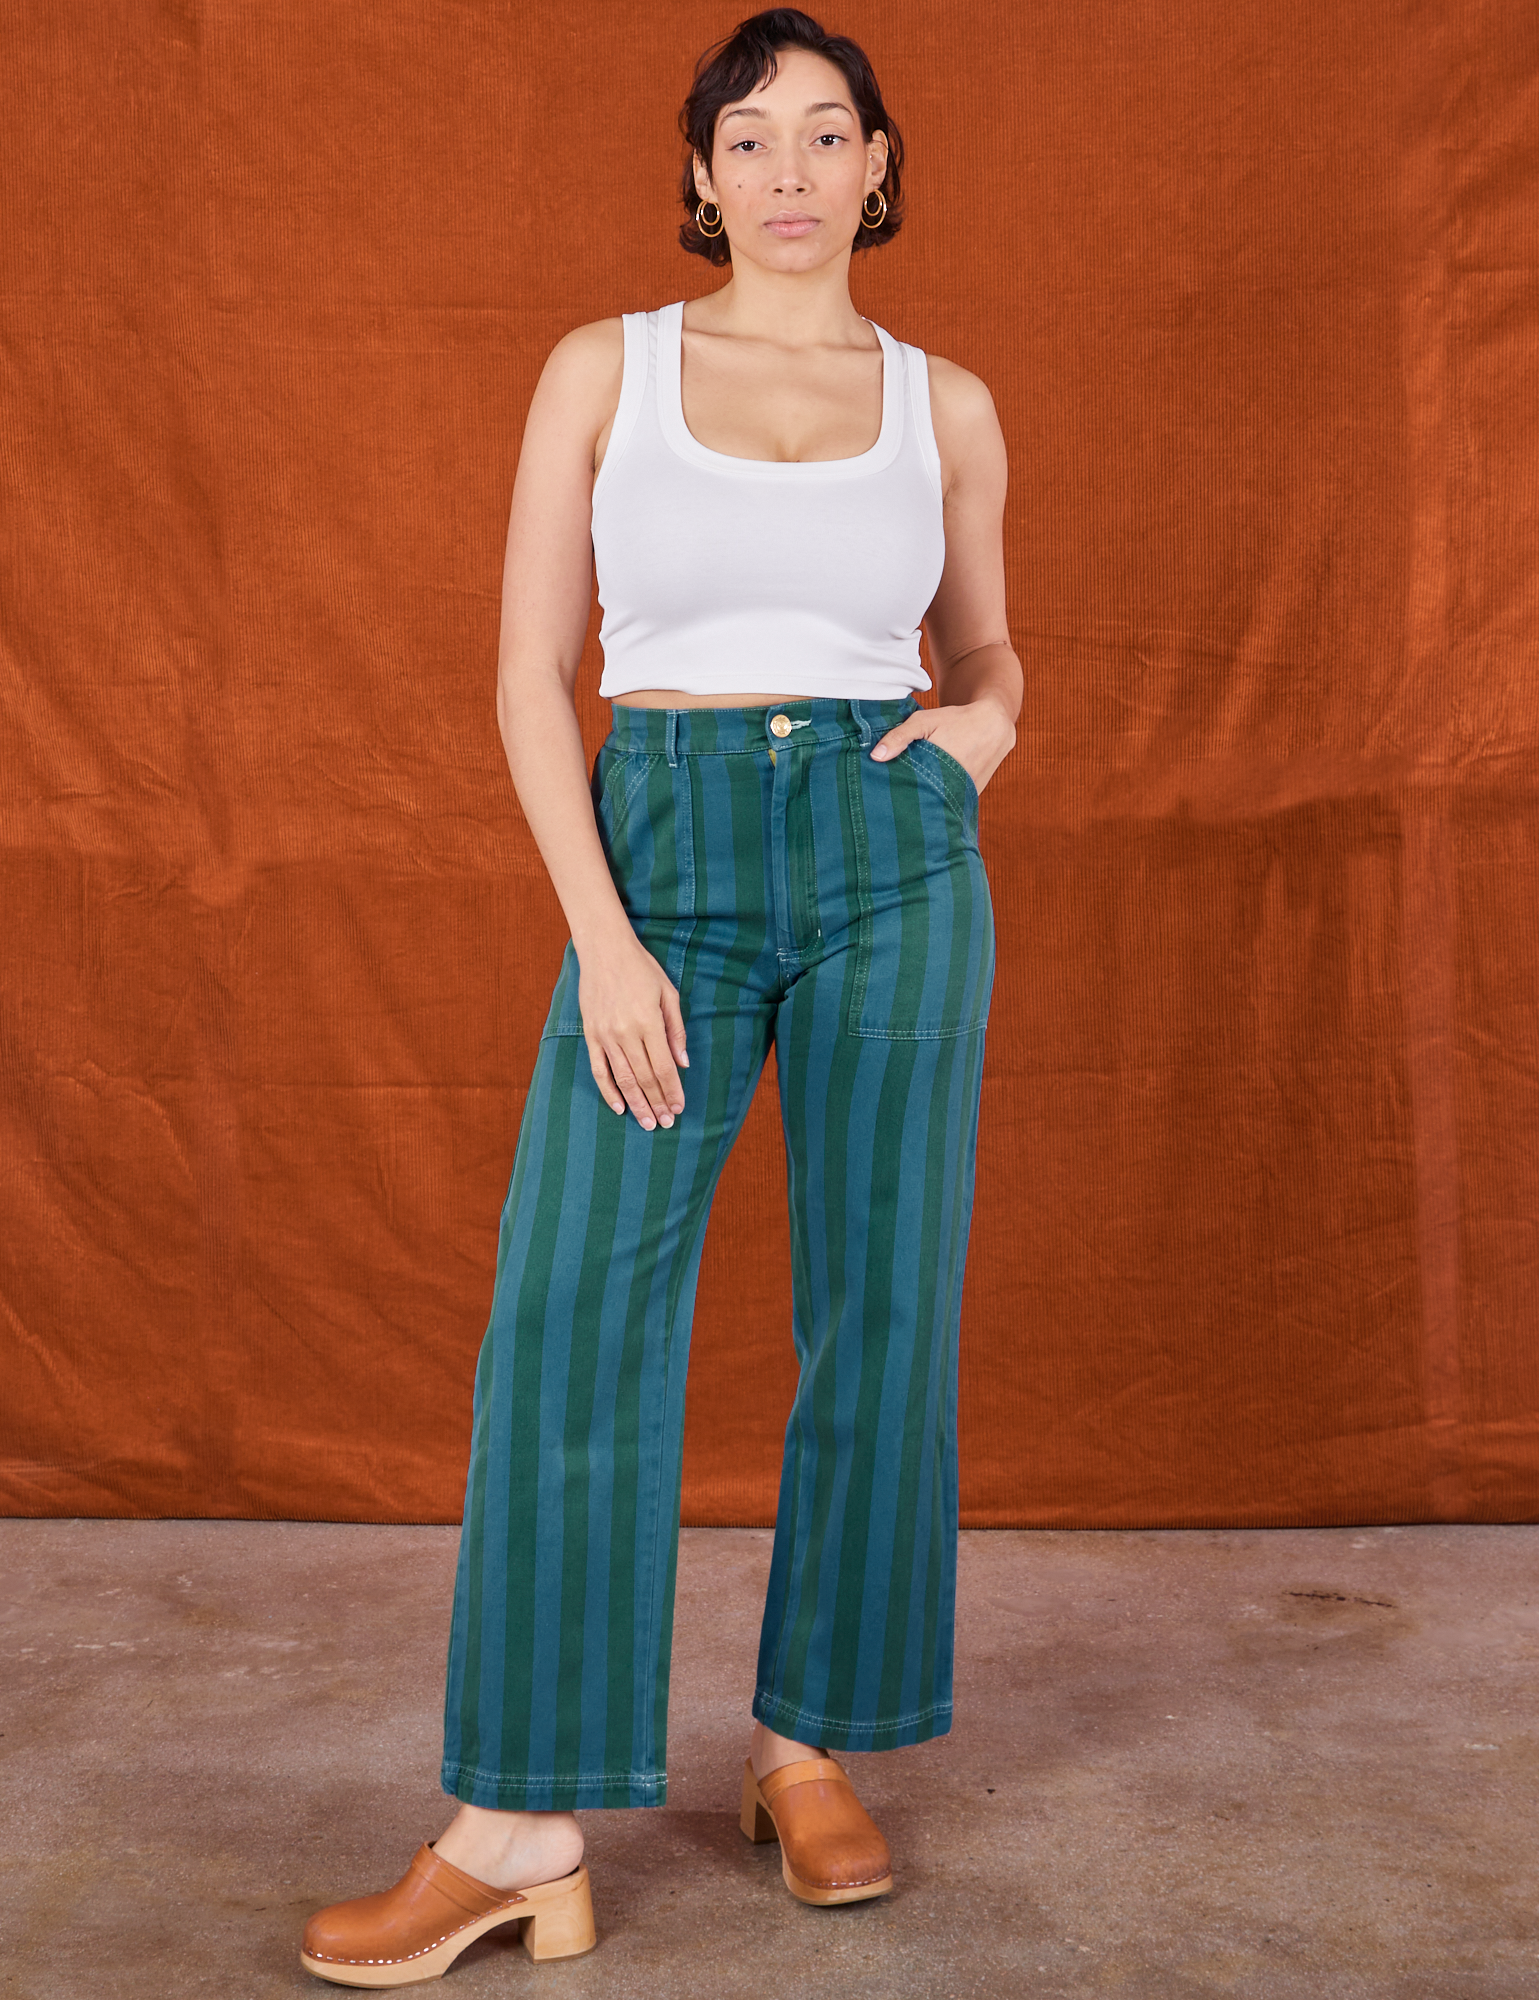 Tiara is 5'4" and wearing size S Overdye Stripe Work Pants in Blue/Green paired with Cropped Tank Top in vintage tee off-white